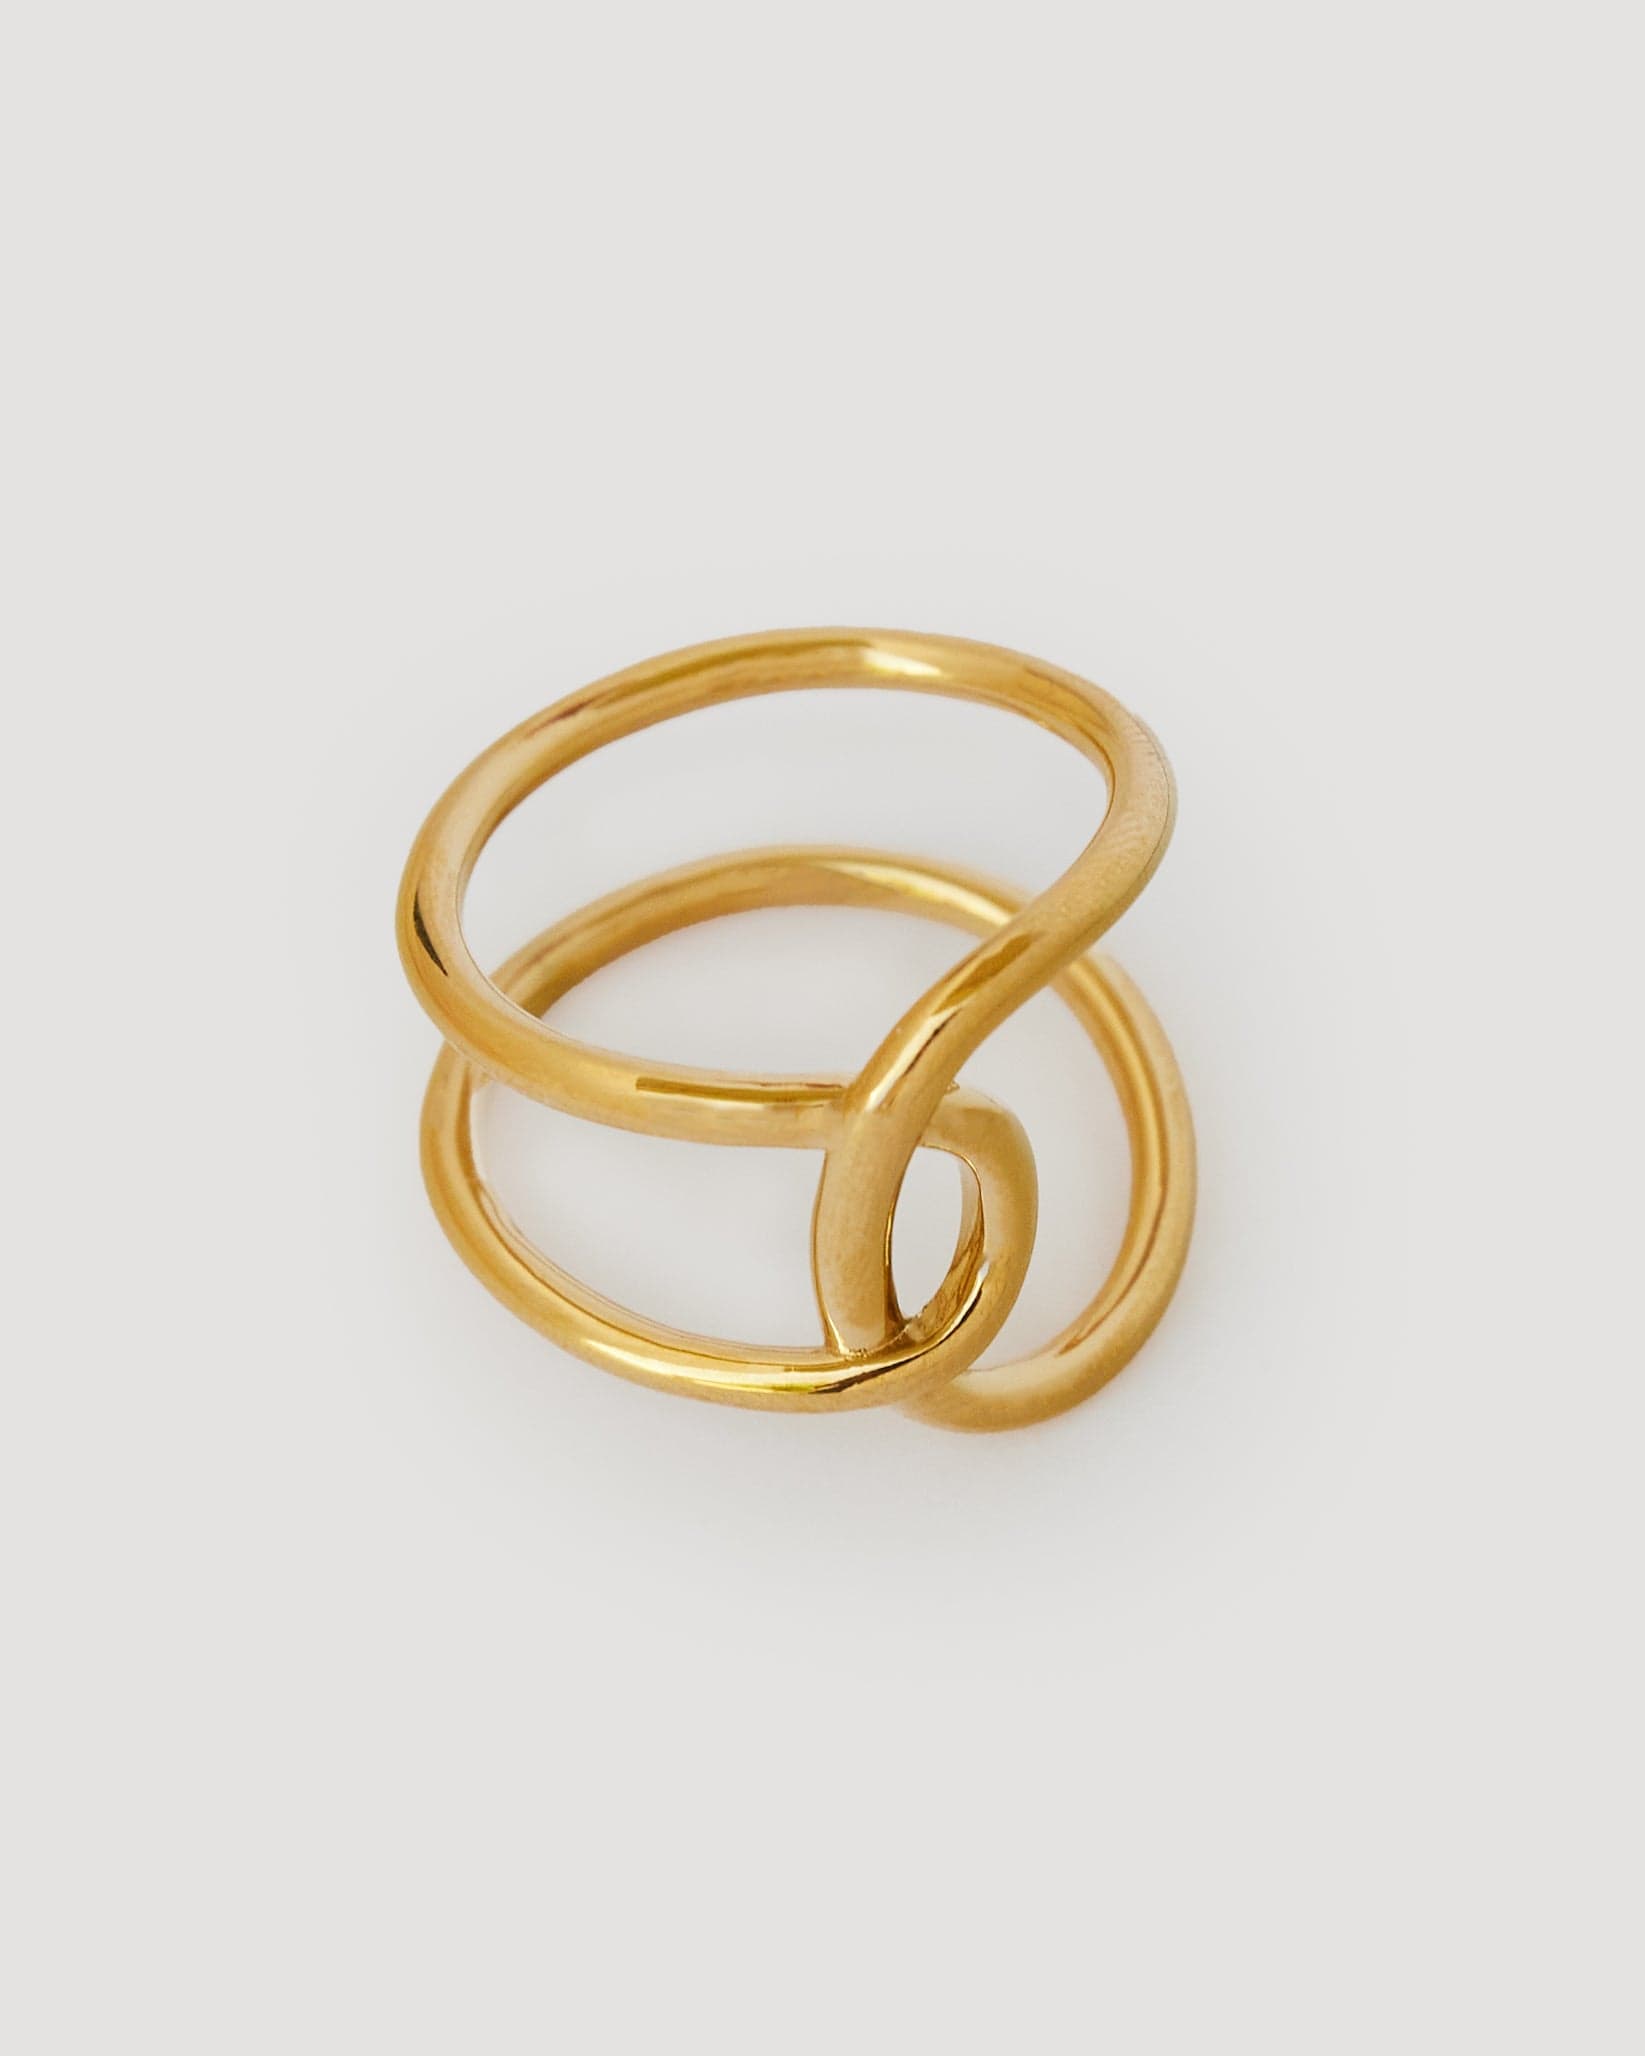 Gold ring with two intertwined bands